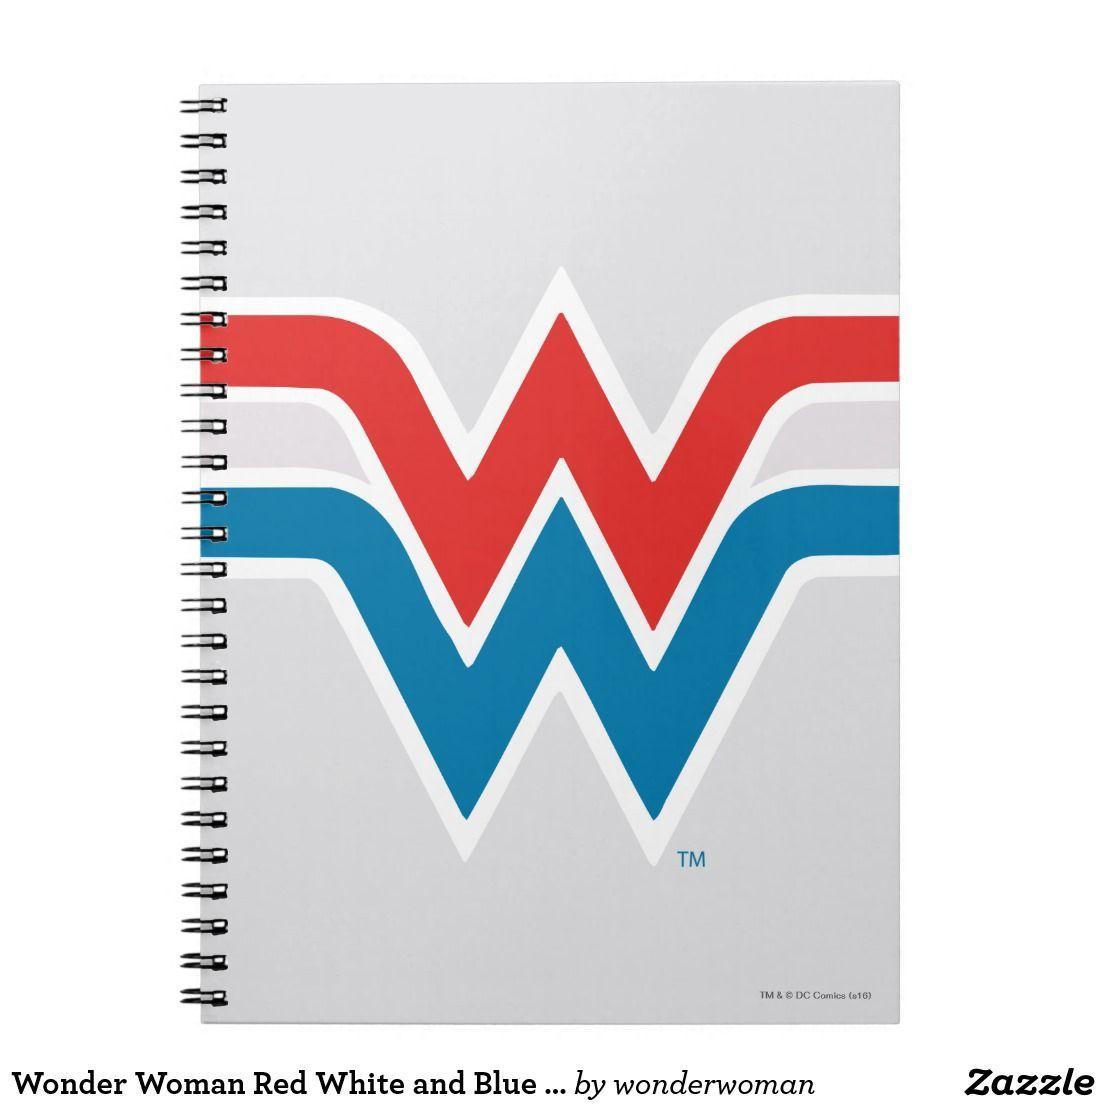 Awesome Woman Logo - Wonder Woman Red White and Blue Logo Notebook. Bright and awesome